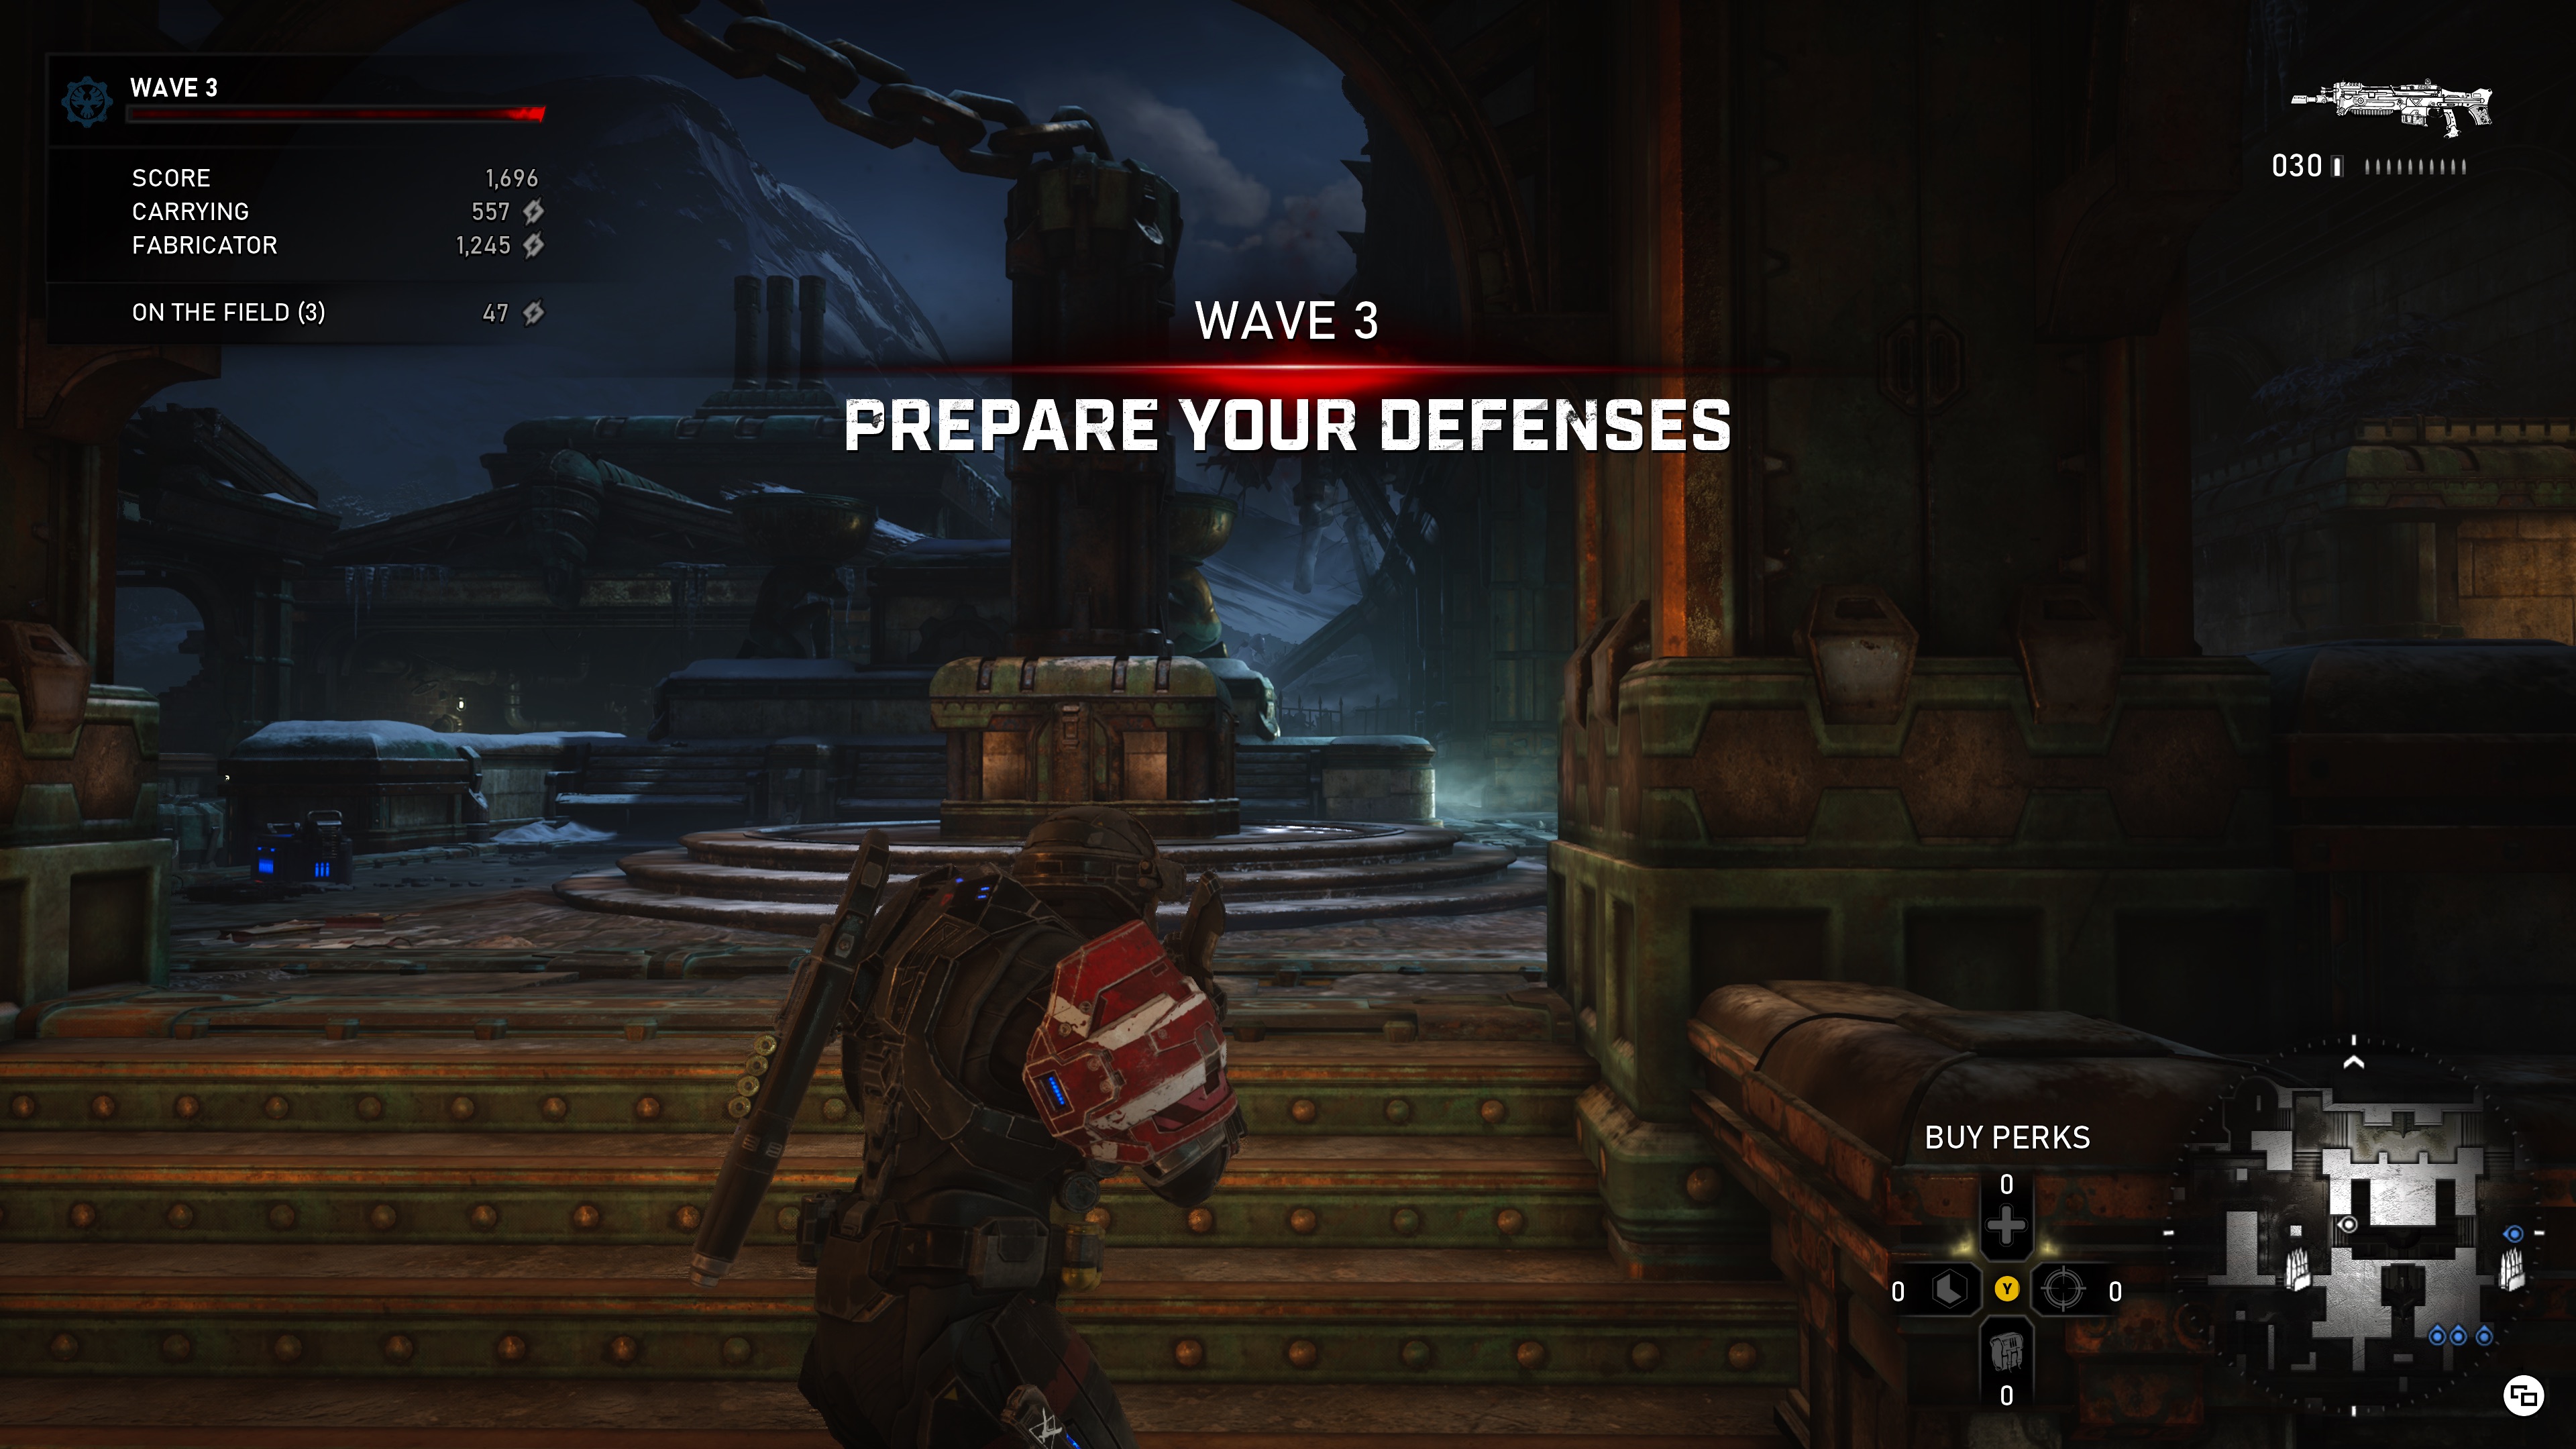 Gears 5 Multiplayer Review 